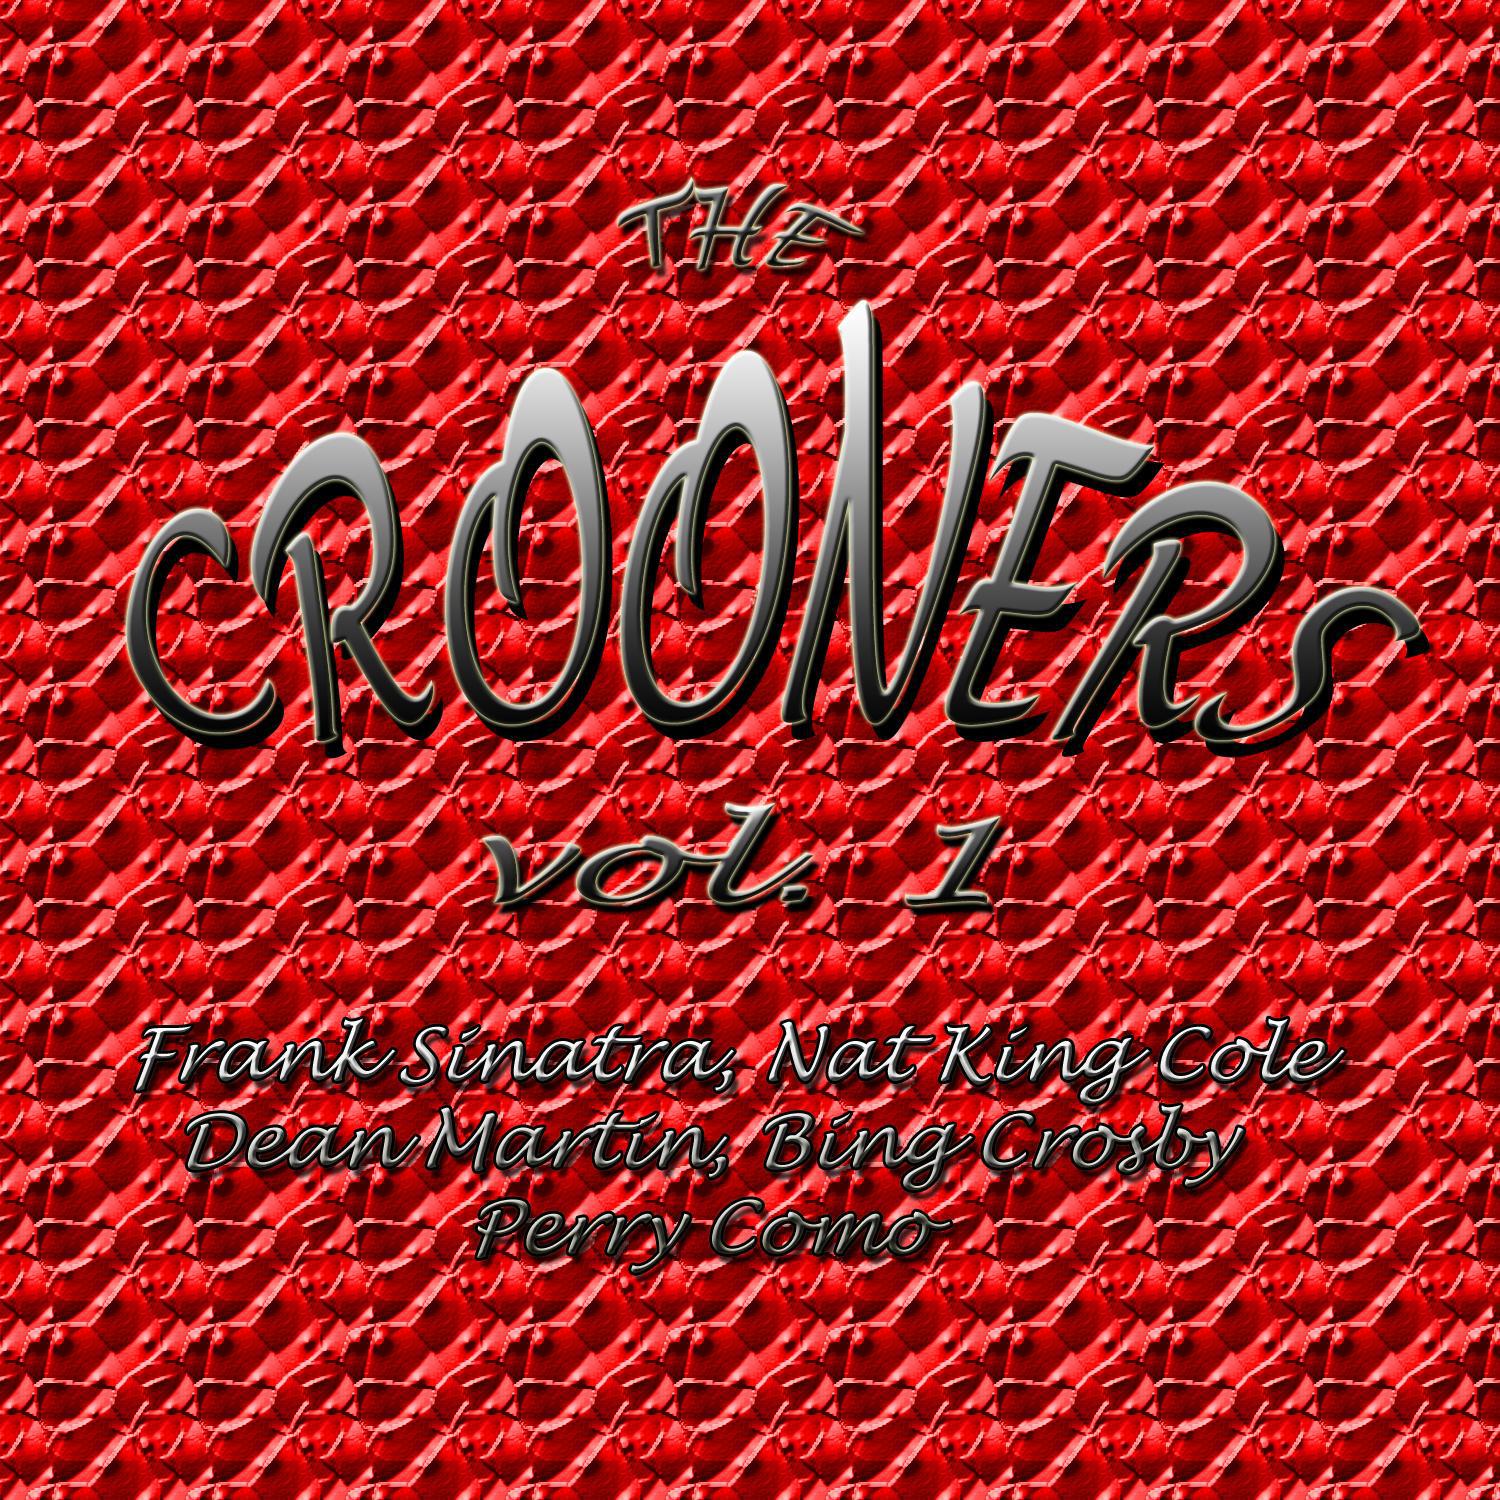 Crooners Vol. 1 the Best of Frank Sinatra, Nat King Cole, Dean Martin, Bing Crosby, Perry Como